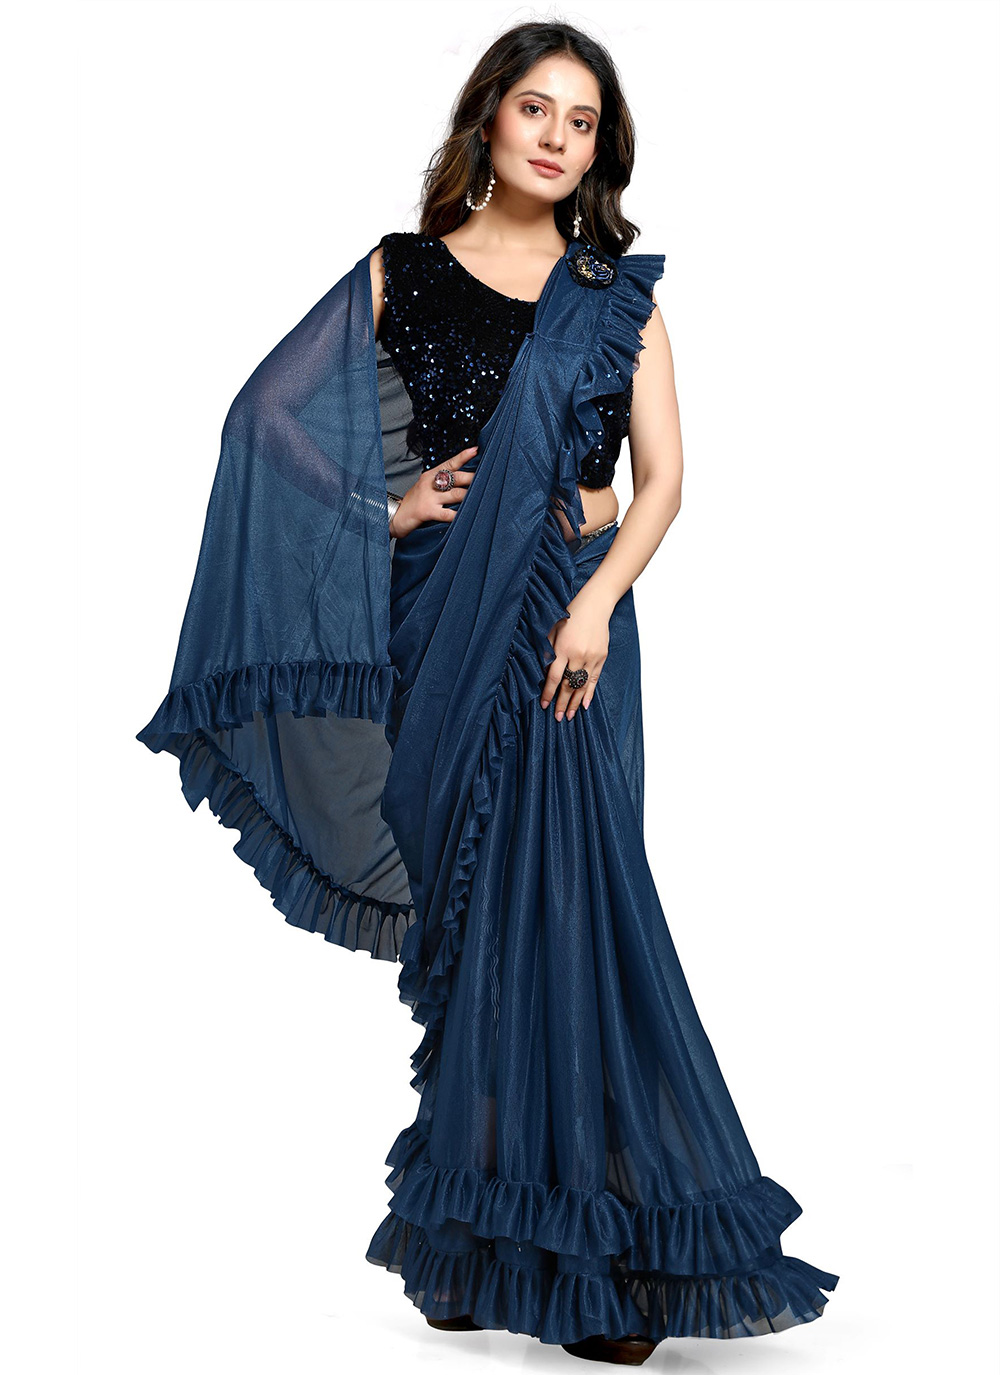 Women S One Minute Sarees - Buy Women S One Minute Sarees online in India-sgquangbinhtourist.com.vn